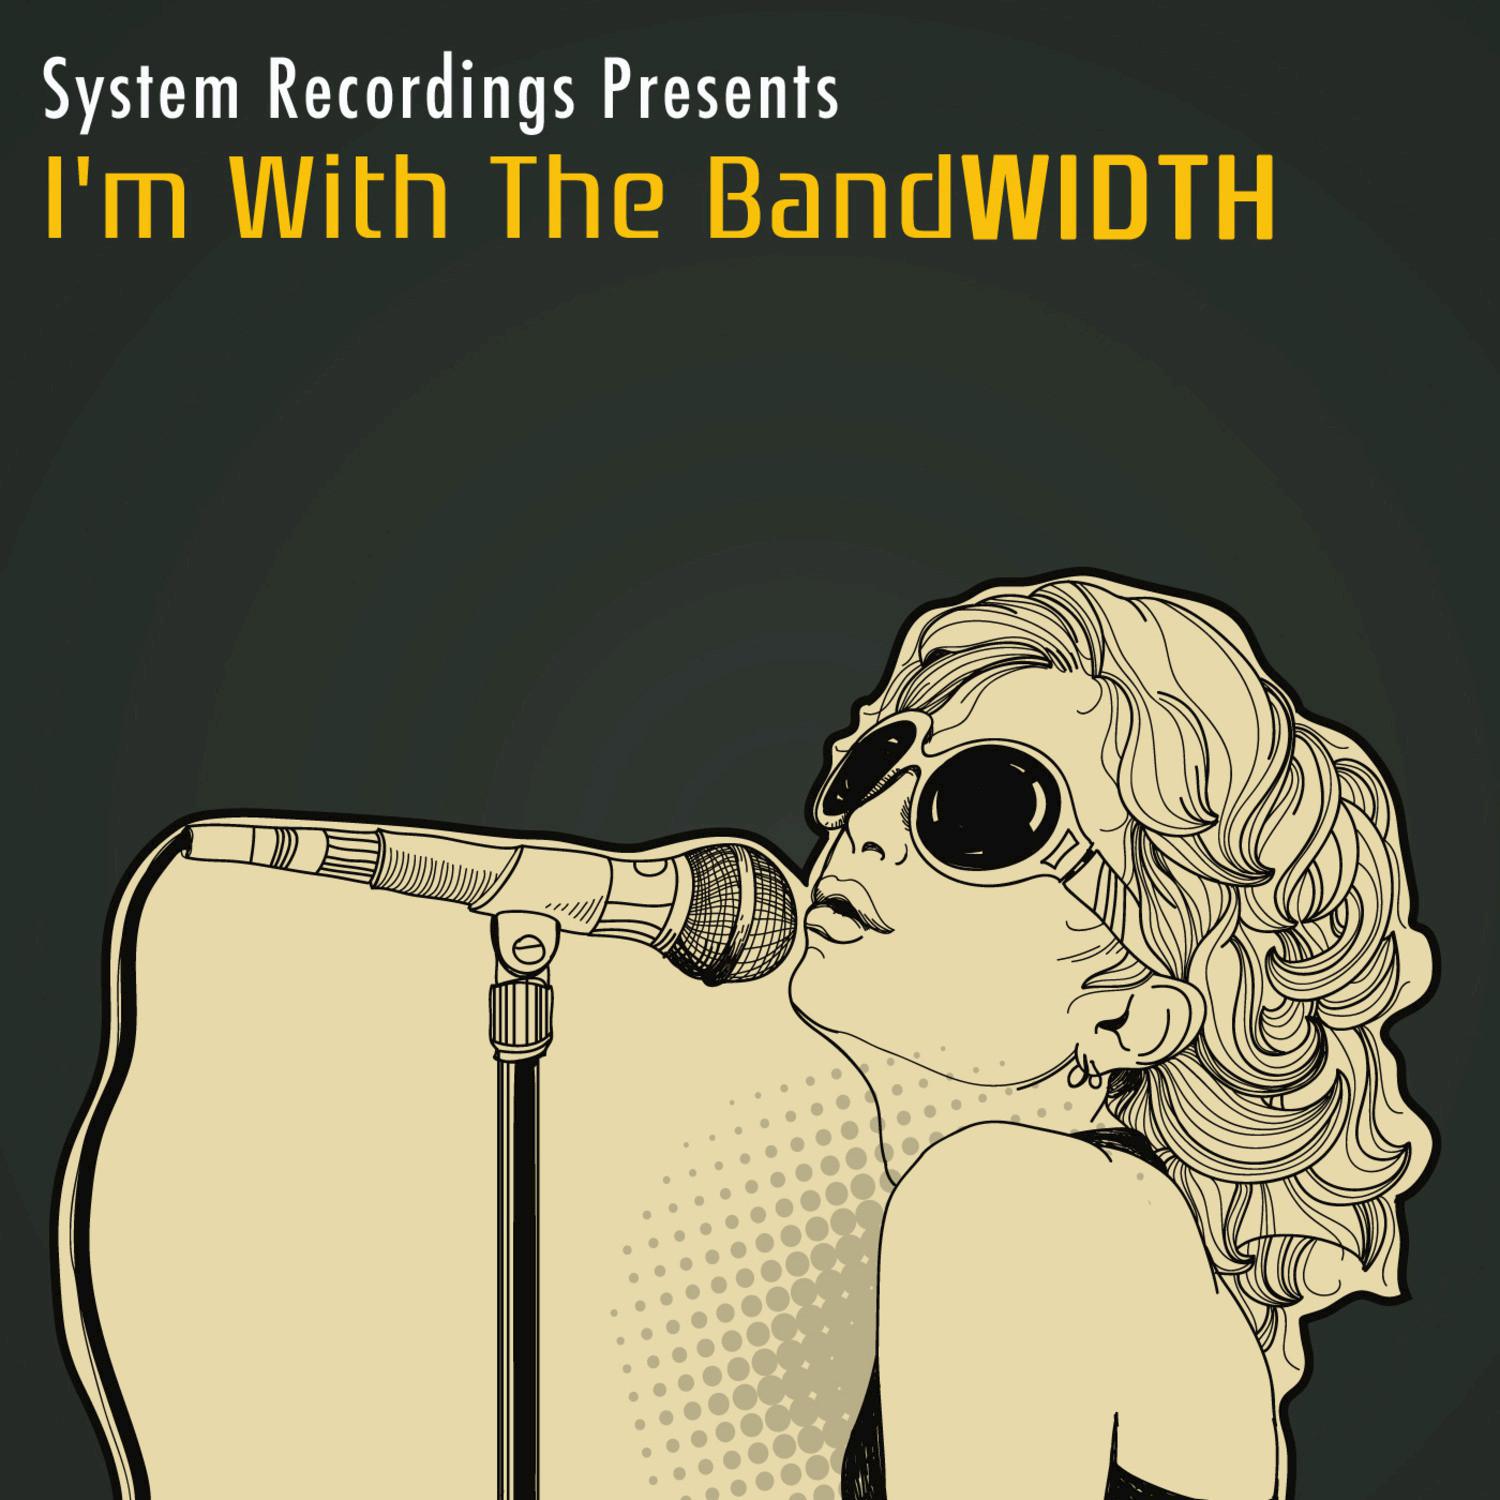 I'm With the Bandwidth